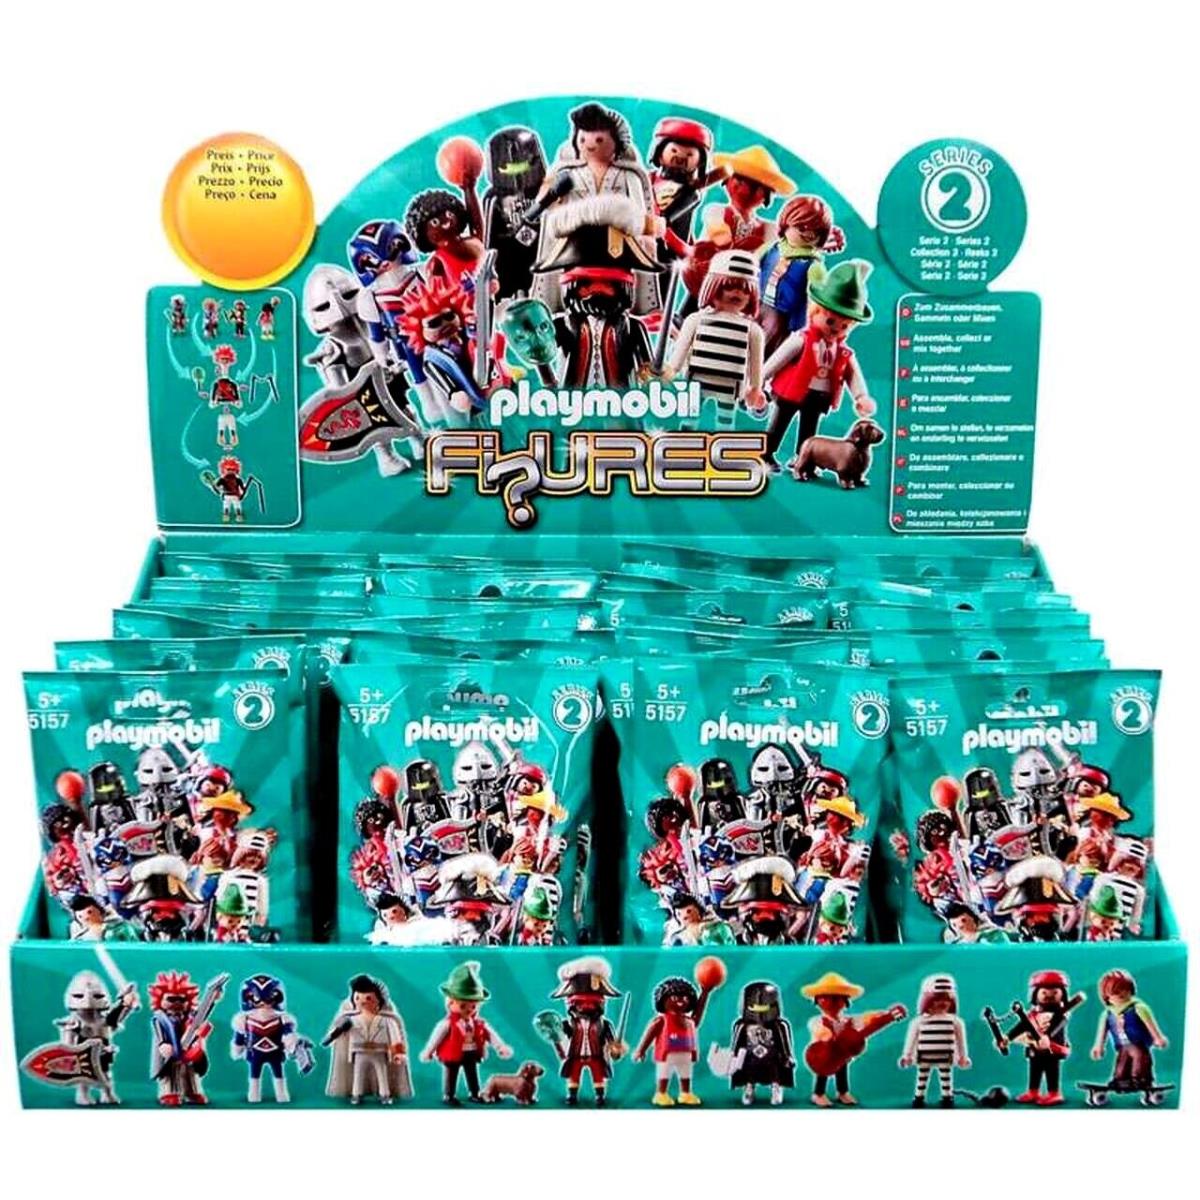 48 Packs Playmobil 5157 Series 2 Boys Mystery Figures Case of Fi Ures Box